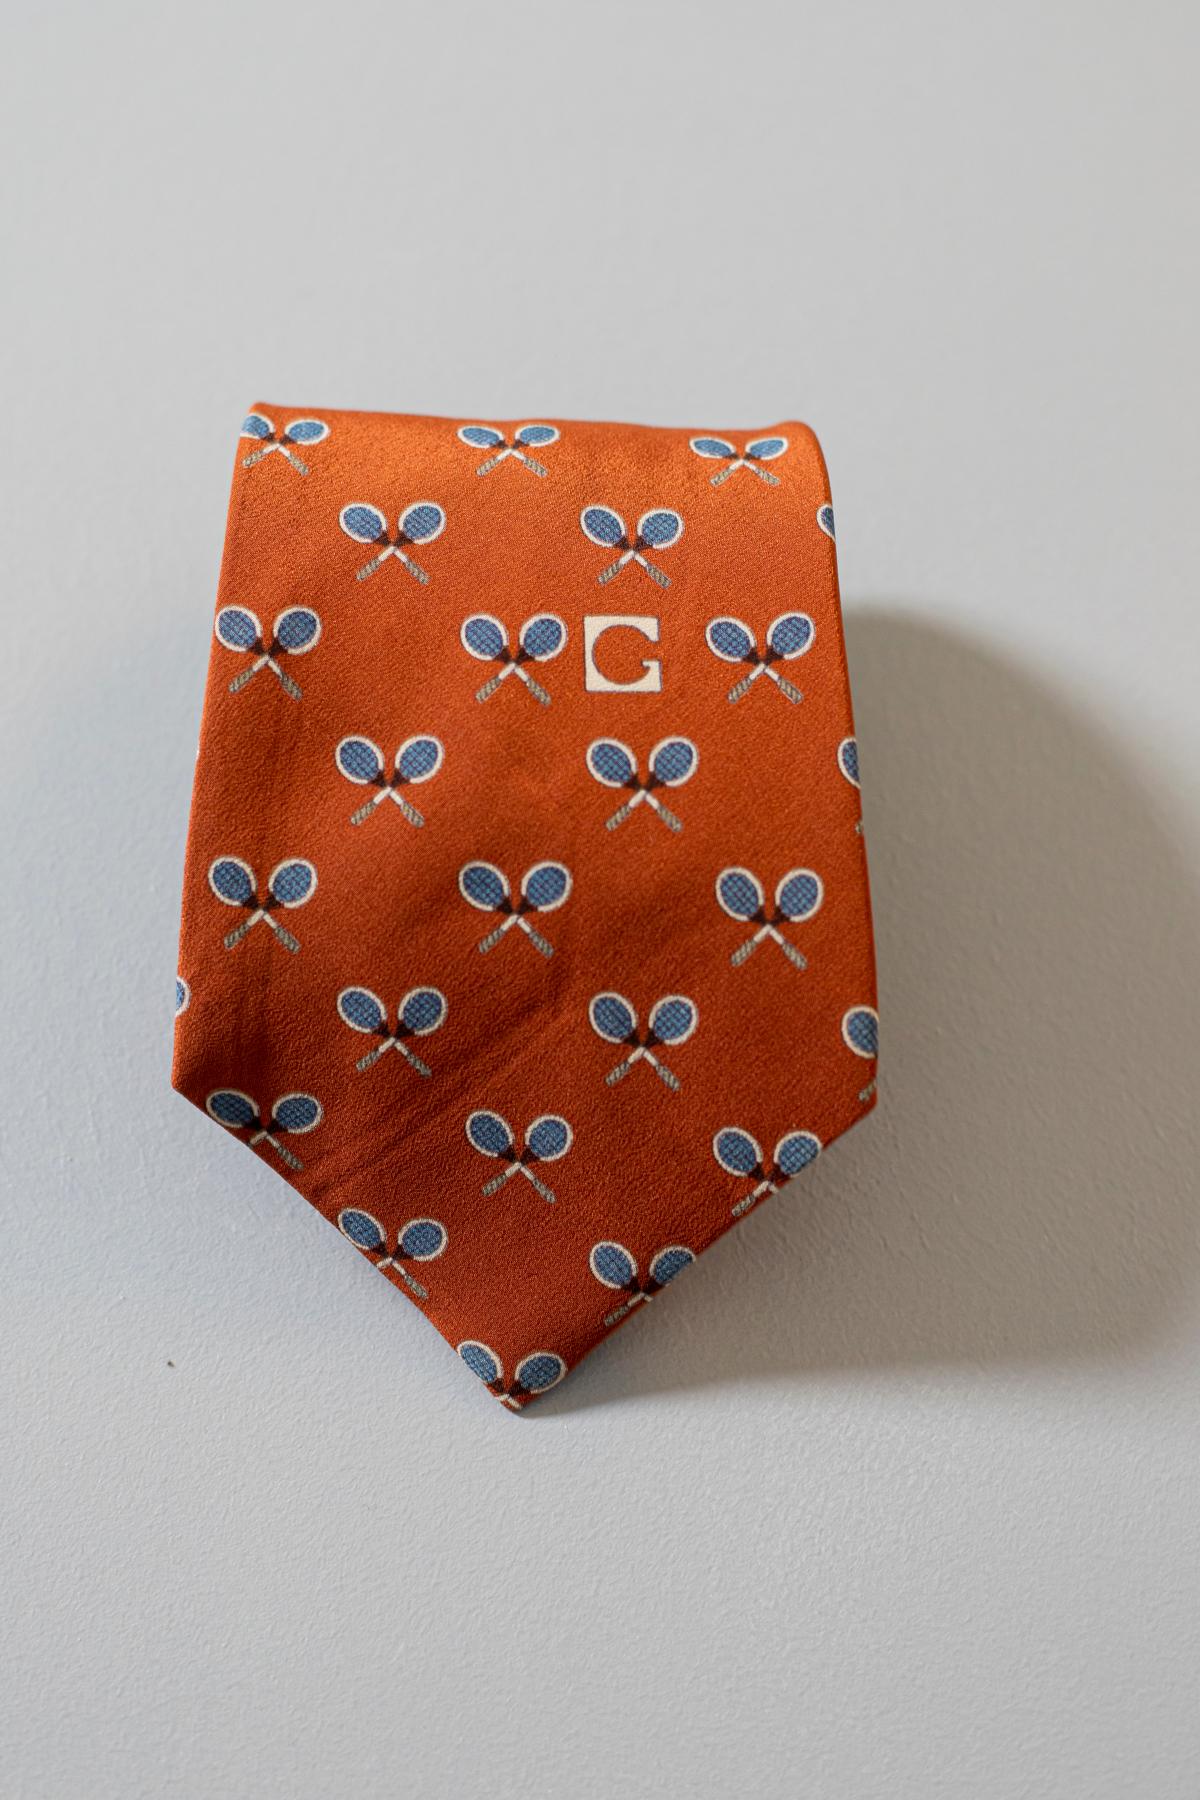 Elegant mid-century tie in silk designed by the italian stylist Gherardini. It is made of 100% silk. Decorated with small rackets on an orange background. simple but at the same time never banal, ideal for a nice Sunday brunch or a cockatil party.